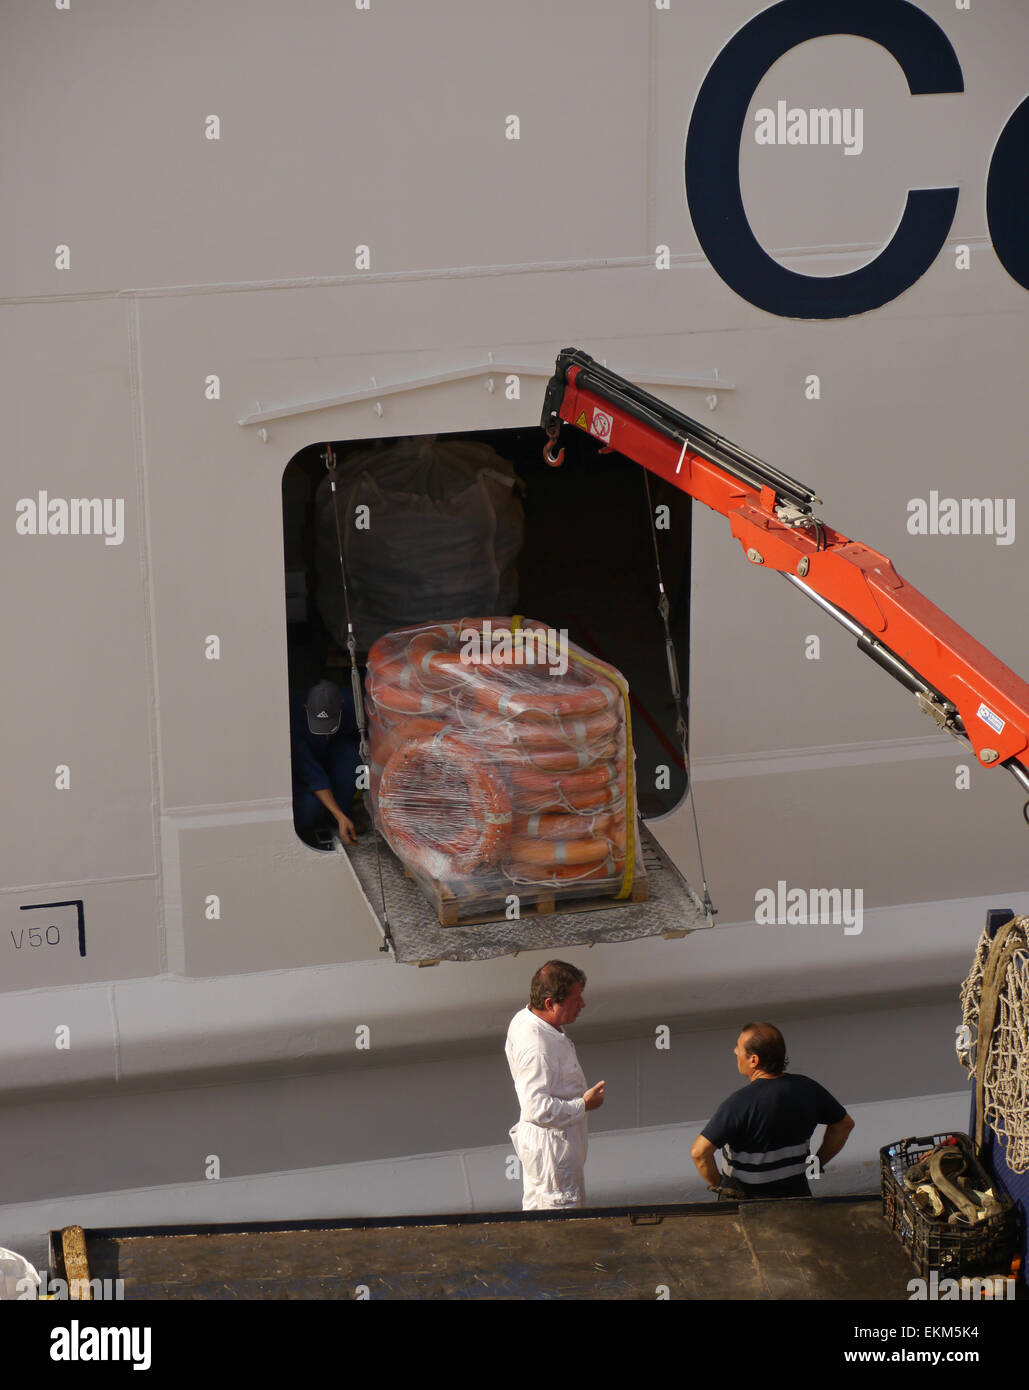 Dockside view of Celebrity Equinox cruise ship with a pallet of life rings being loaded. Stock Photo